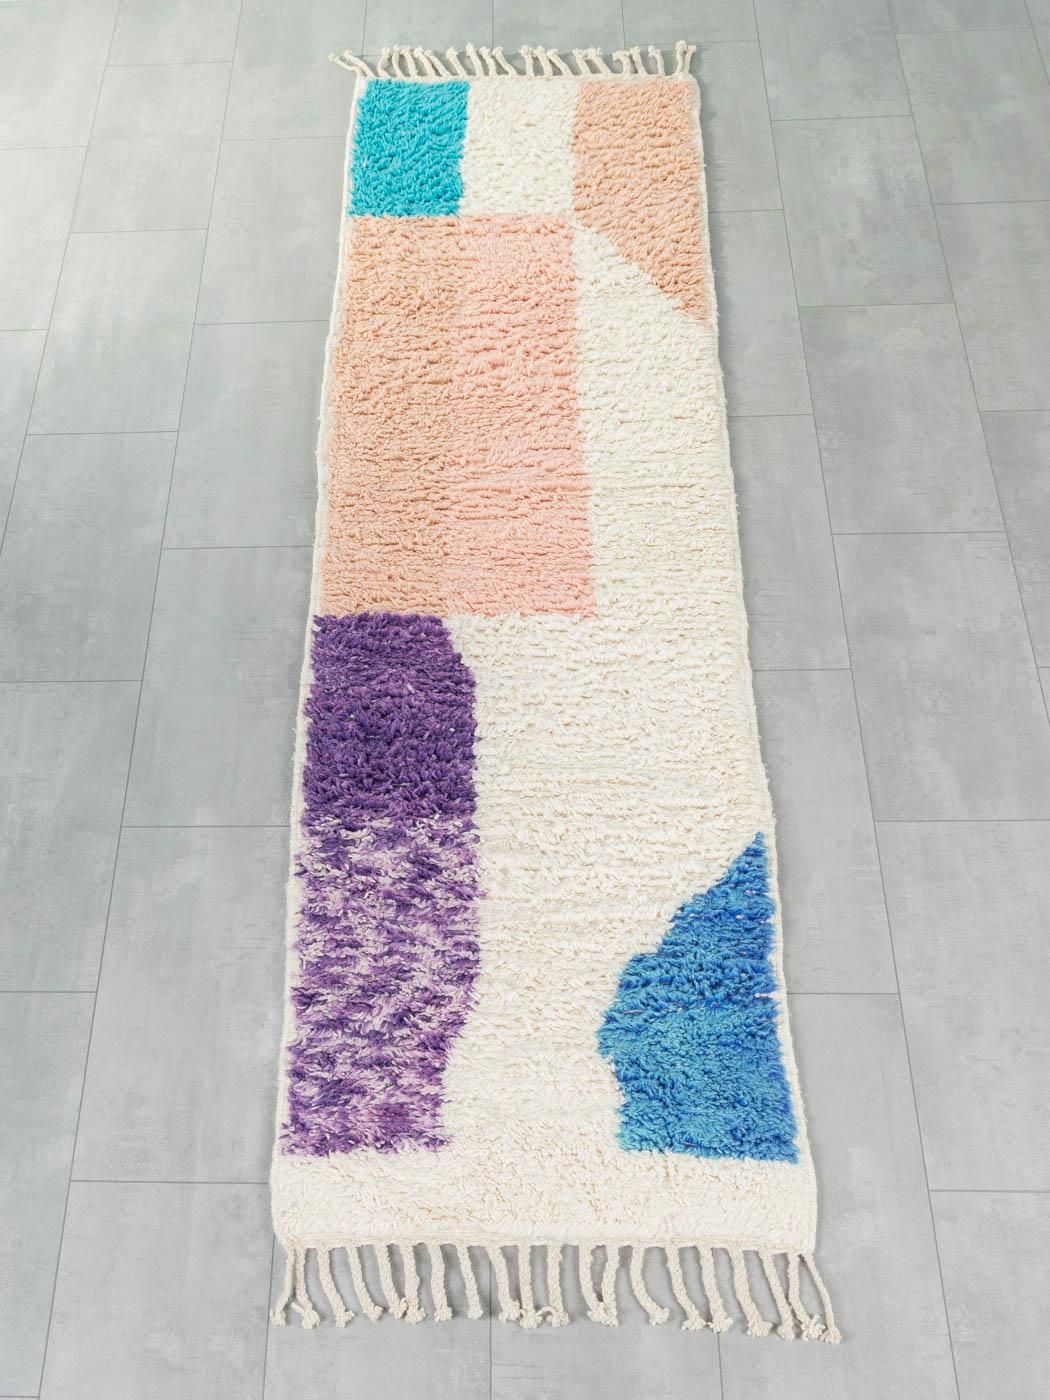 Abstract Runner is a contemporary 100% wool rug – thick and soft, comfortable underfoot. Our Berber rugs are handwoven and handknotted by Amazigh women in the Atlas Mountains. These communities have been crafting rugs for thousands of years. One